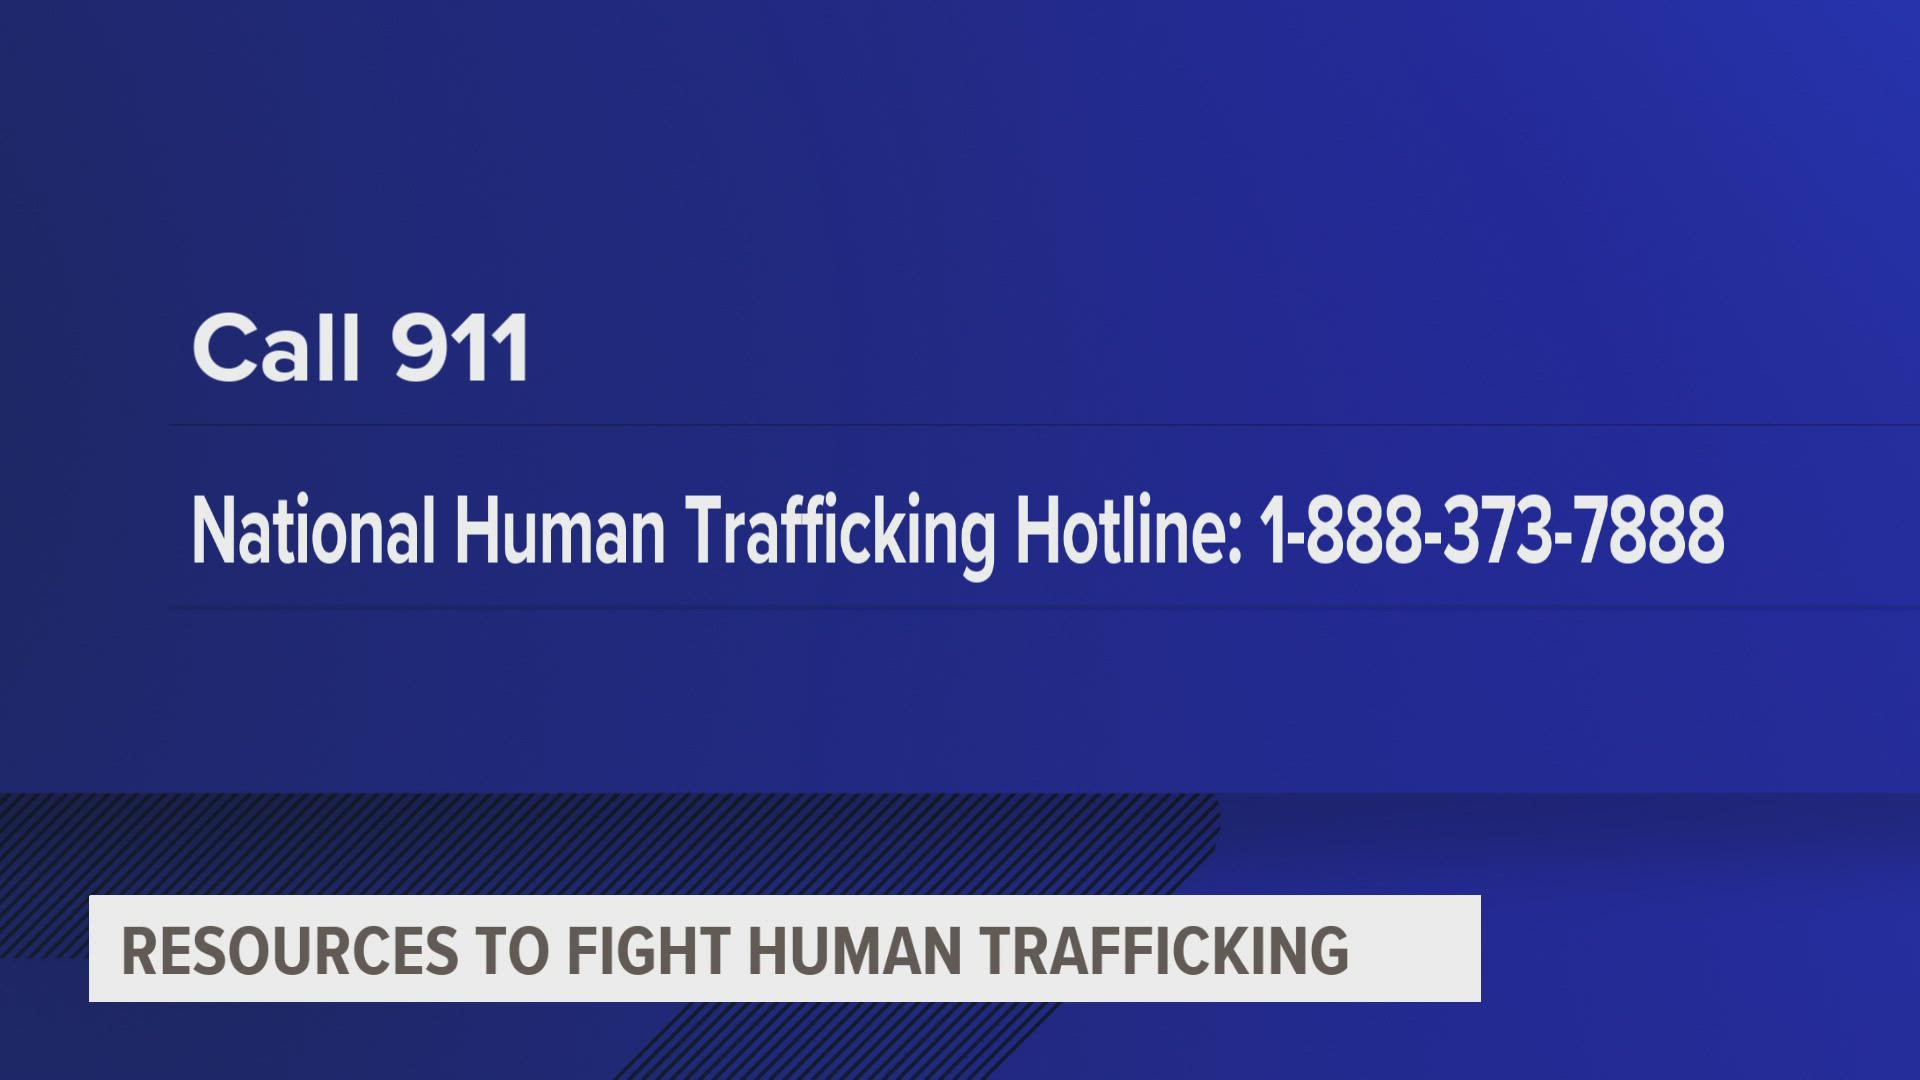 Sgt. Kevin Killpack told Local 5 one of the biggest misconceptions of human trafficking is that it could potentially be a consensual act between two people.